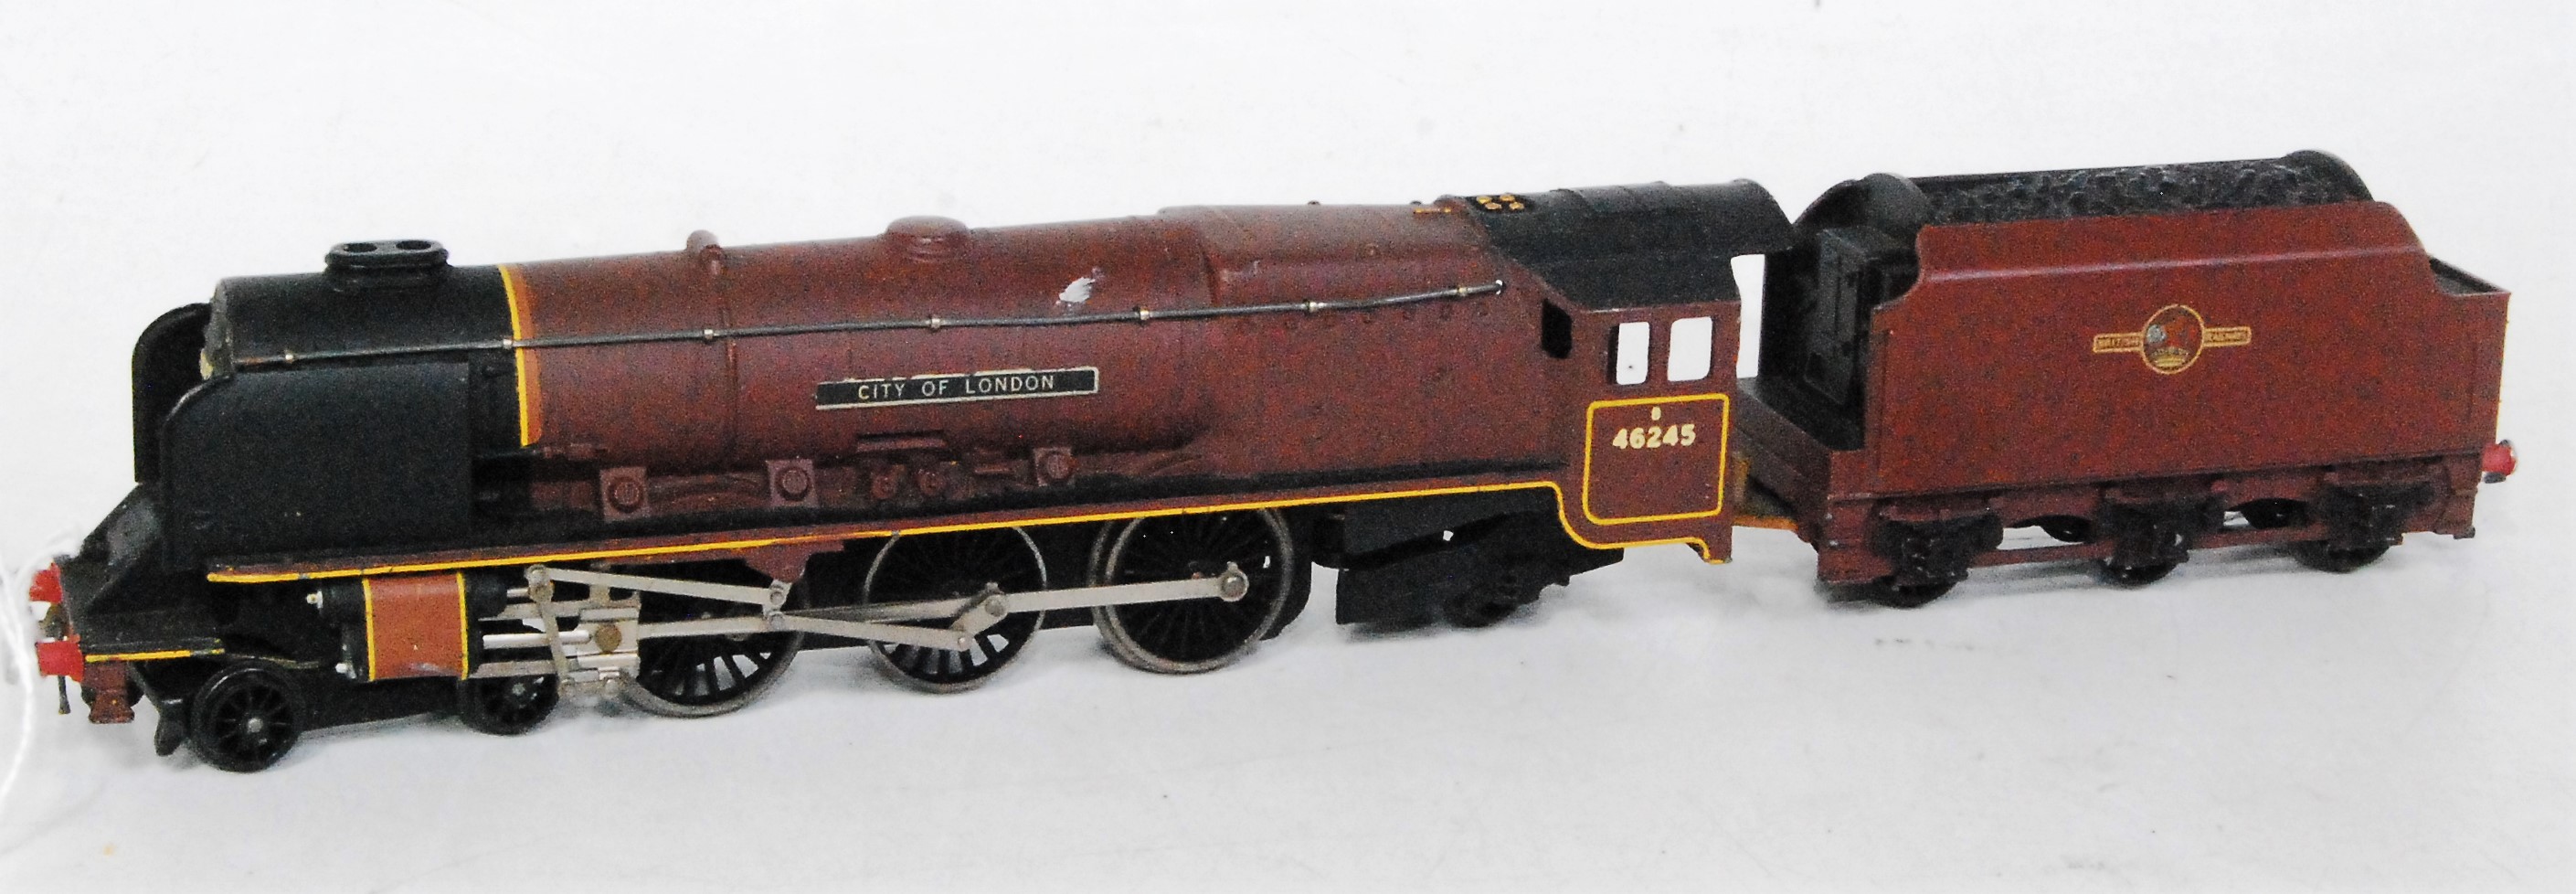 Hornby Dublo 2226 (2-rail) City of London, 4-6-2 loco and tender, small dab of white paint on top of